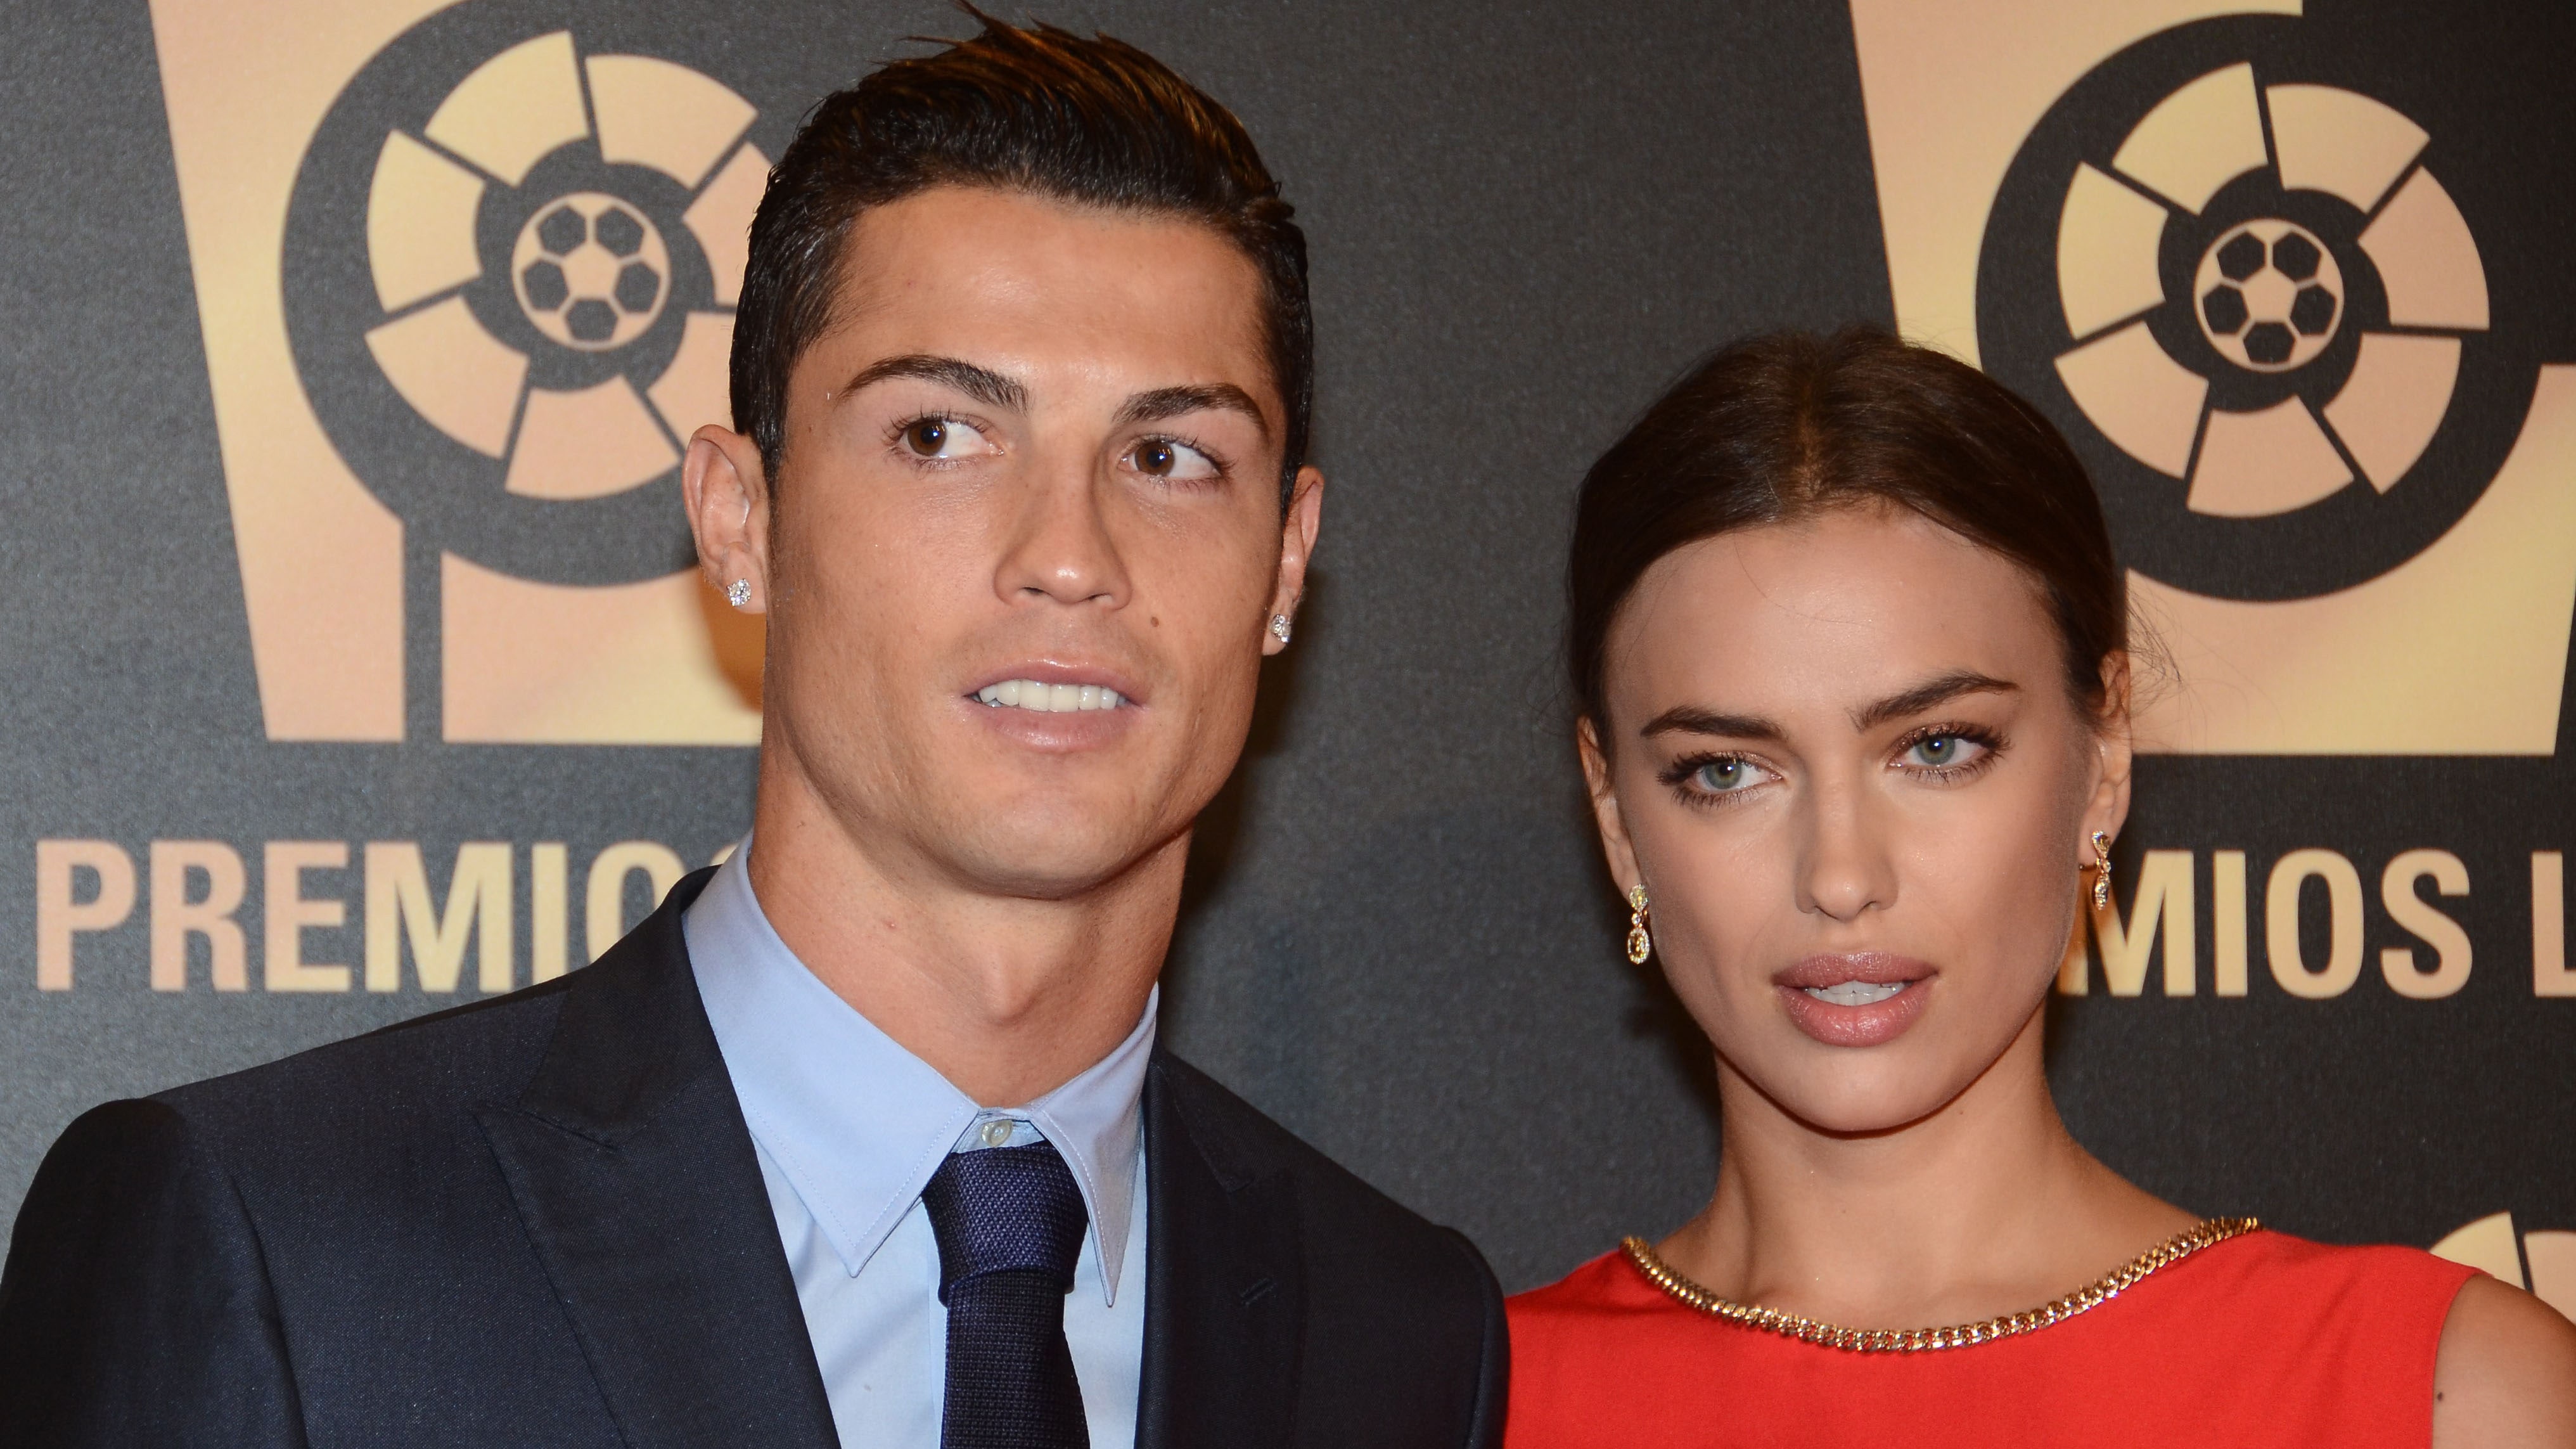 Cristiano Ronaldo looks to his right in a suit with Irina Shayk in red on the carpet